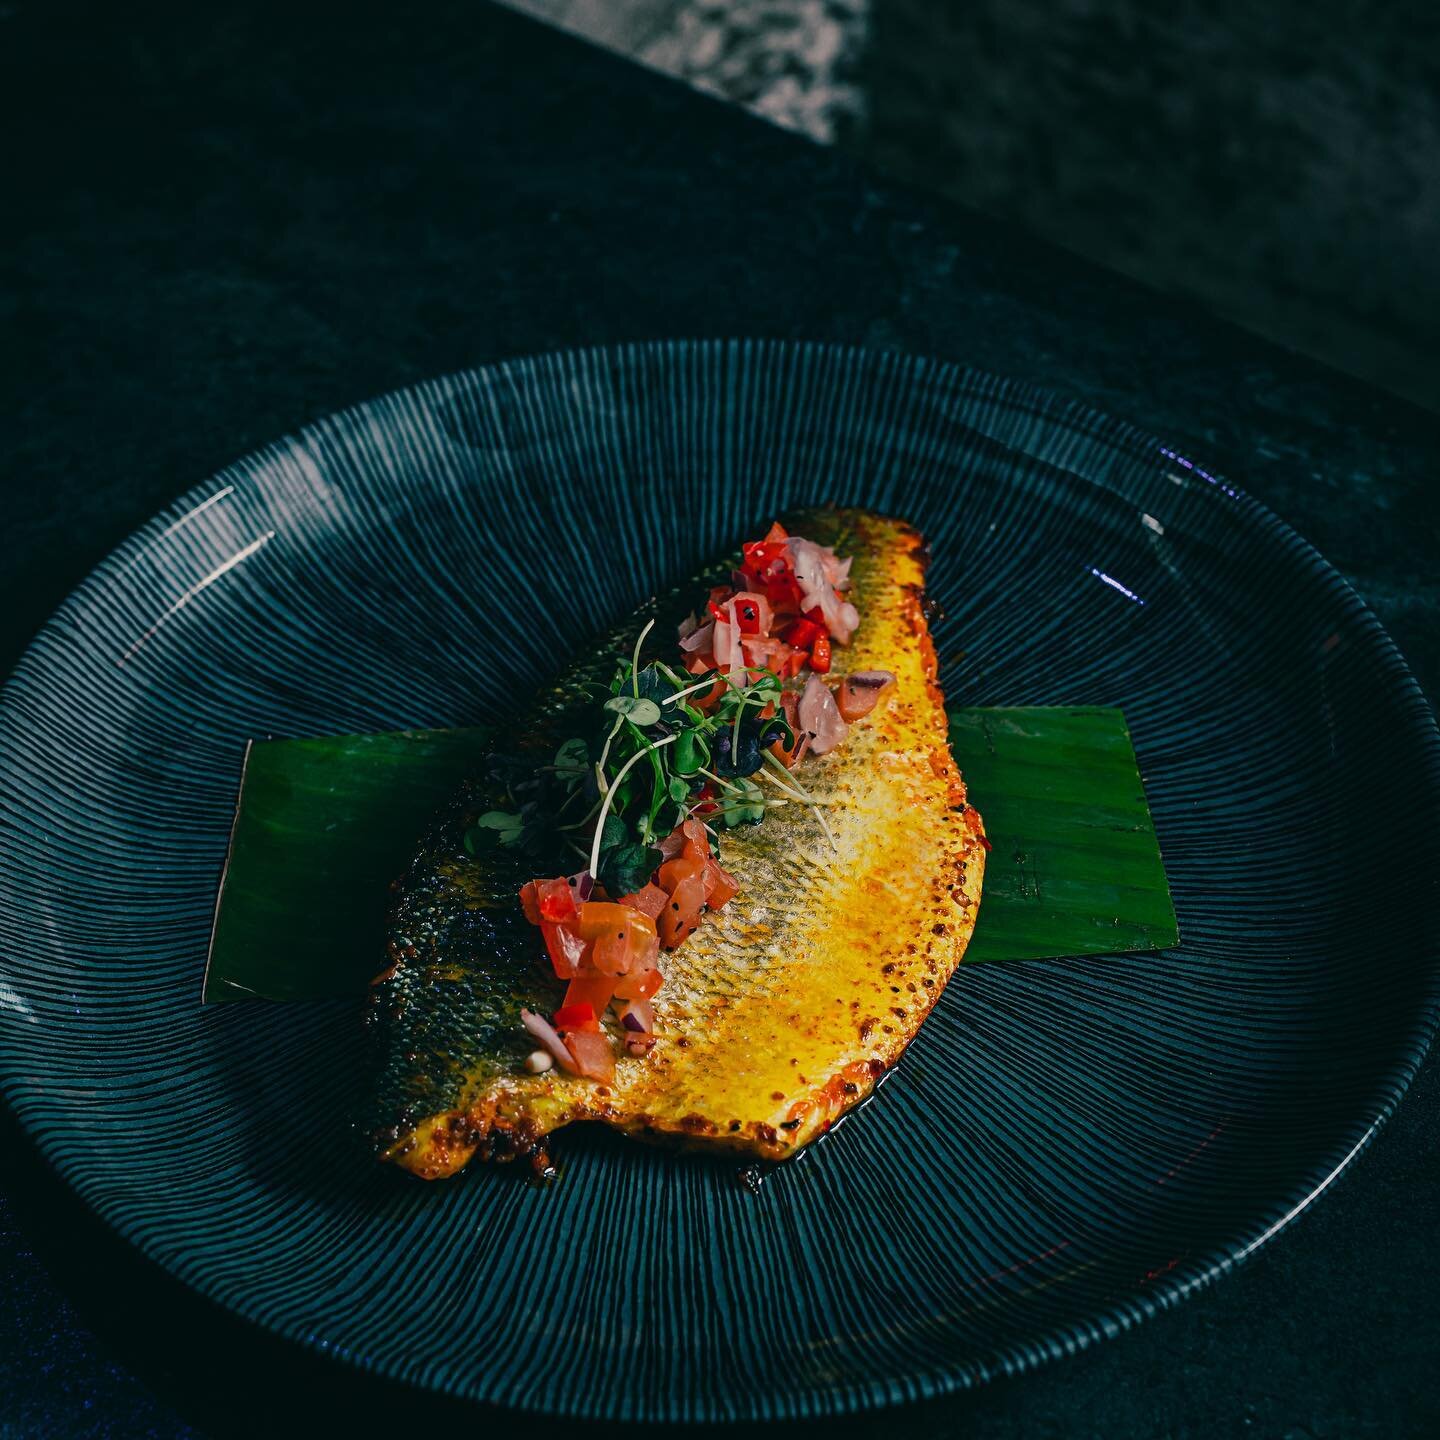 Grilled Sea Bass - topped with fresh Bengali style tomato salsa, lightly spiced and grilled on an open grill 🐟 

Book your table at N&Ouml;A ❤️
Visit www.noalounge.com to reserve your table. On the day bookings, please call 01923 545047. Phone lines